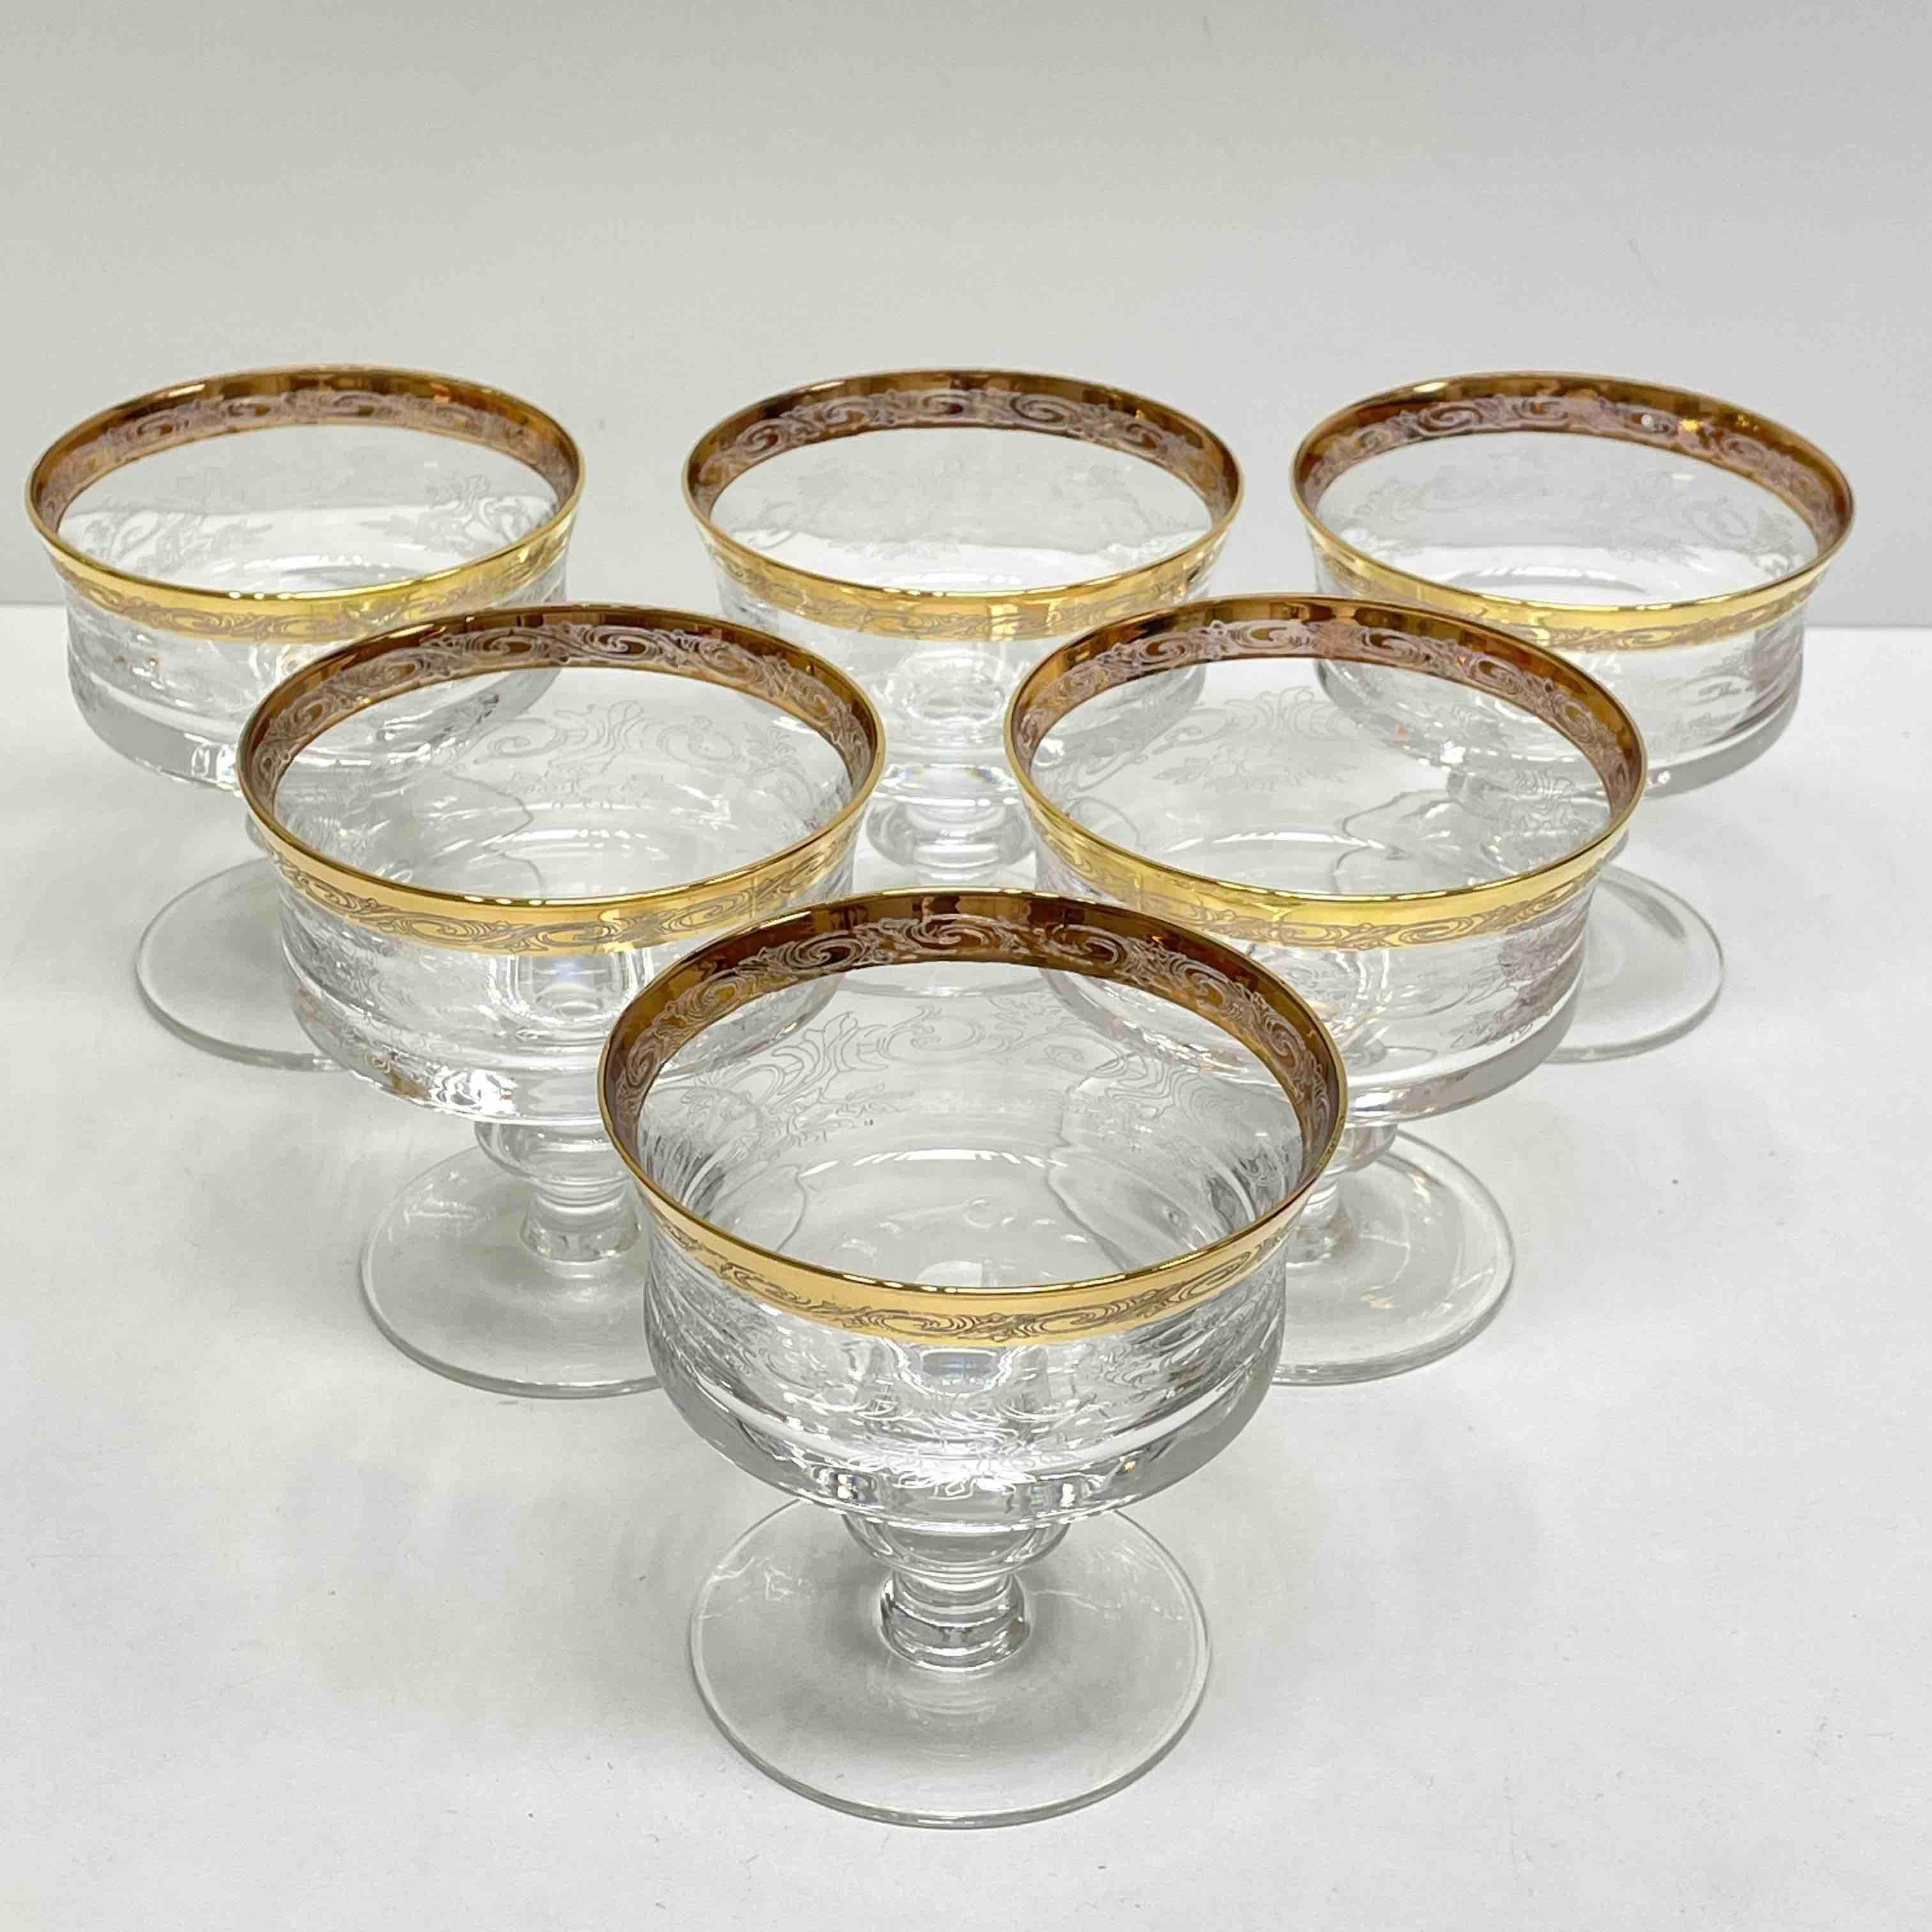 Beautiful hand blown champagne bowls, Six colorless thick Glasses, round stand, shaft with pointed nodus, bulbous bowl/body, stylized floral engraving and relief decoration, 24 karat gold-colored painted, gold rim. A nice addition to any table.